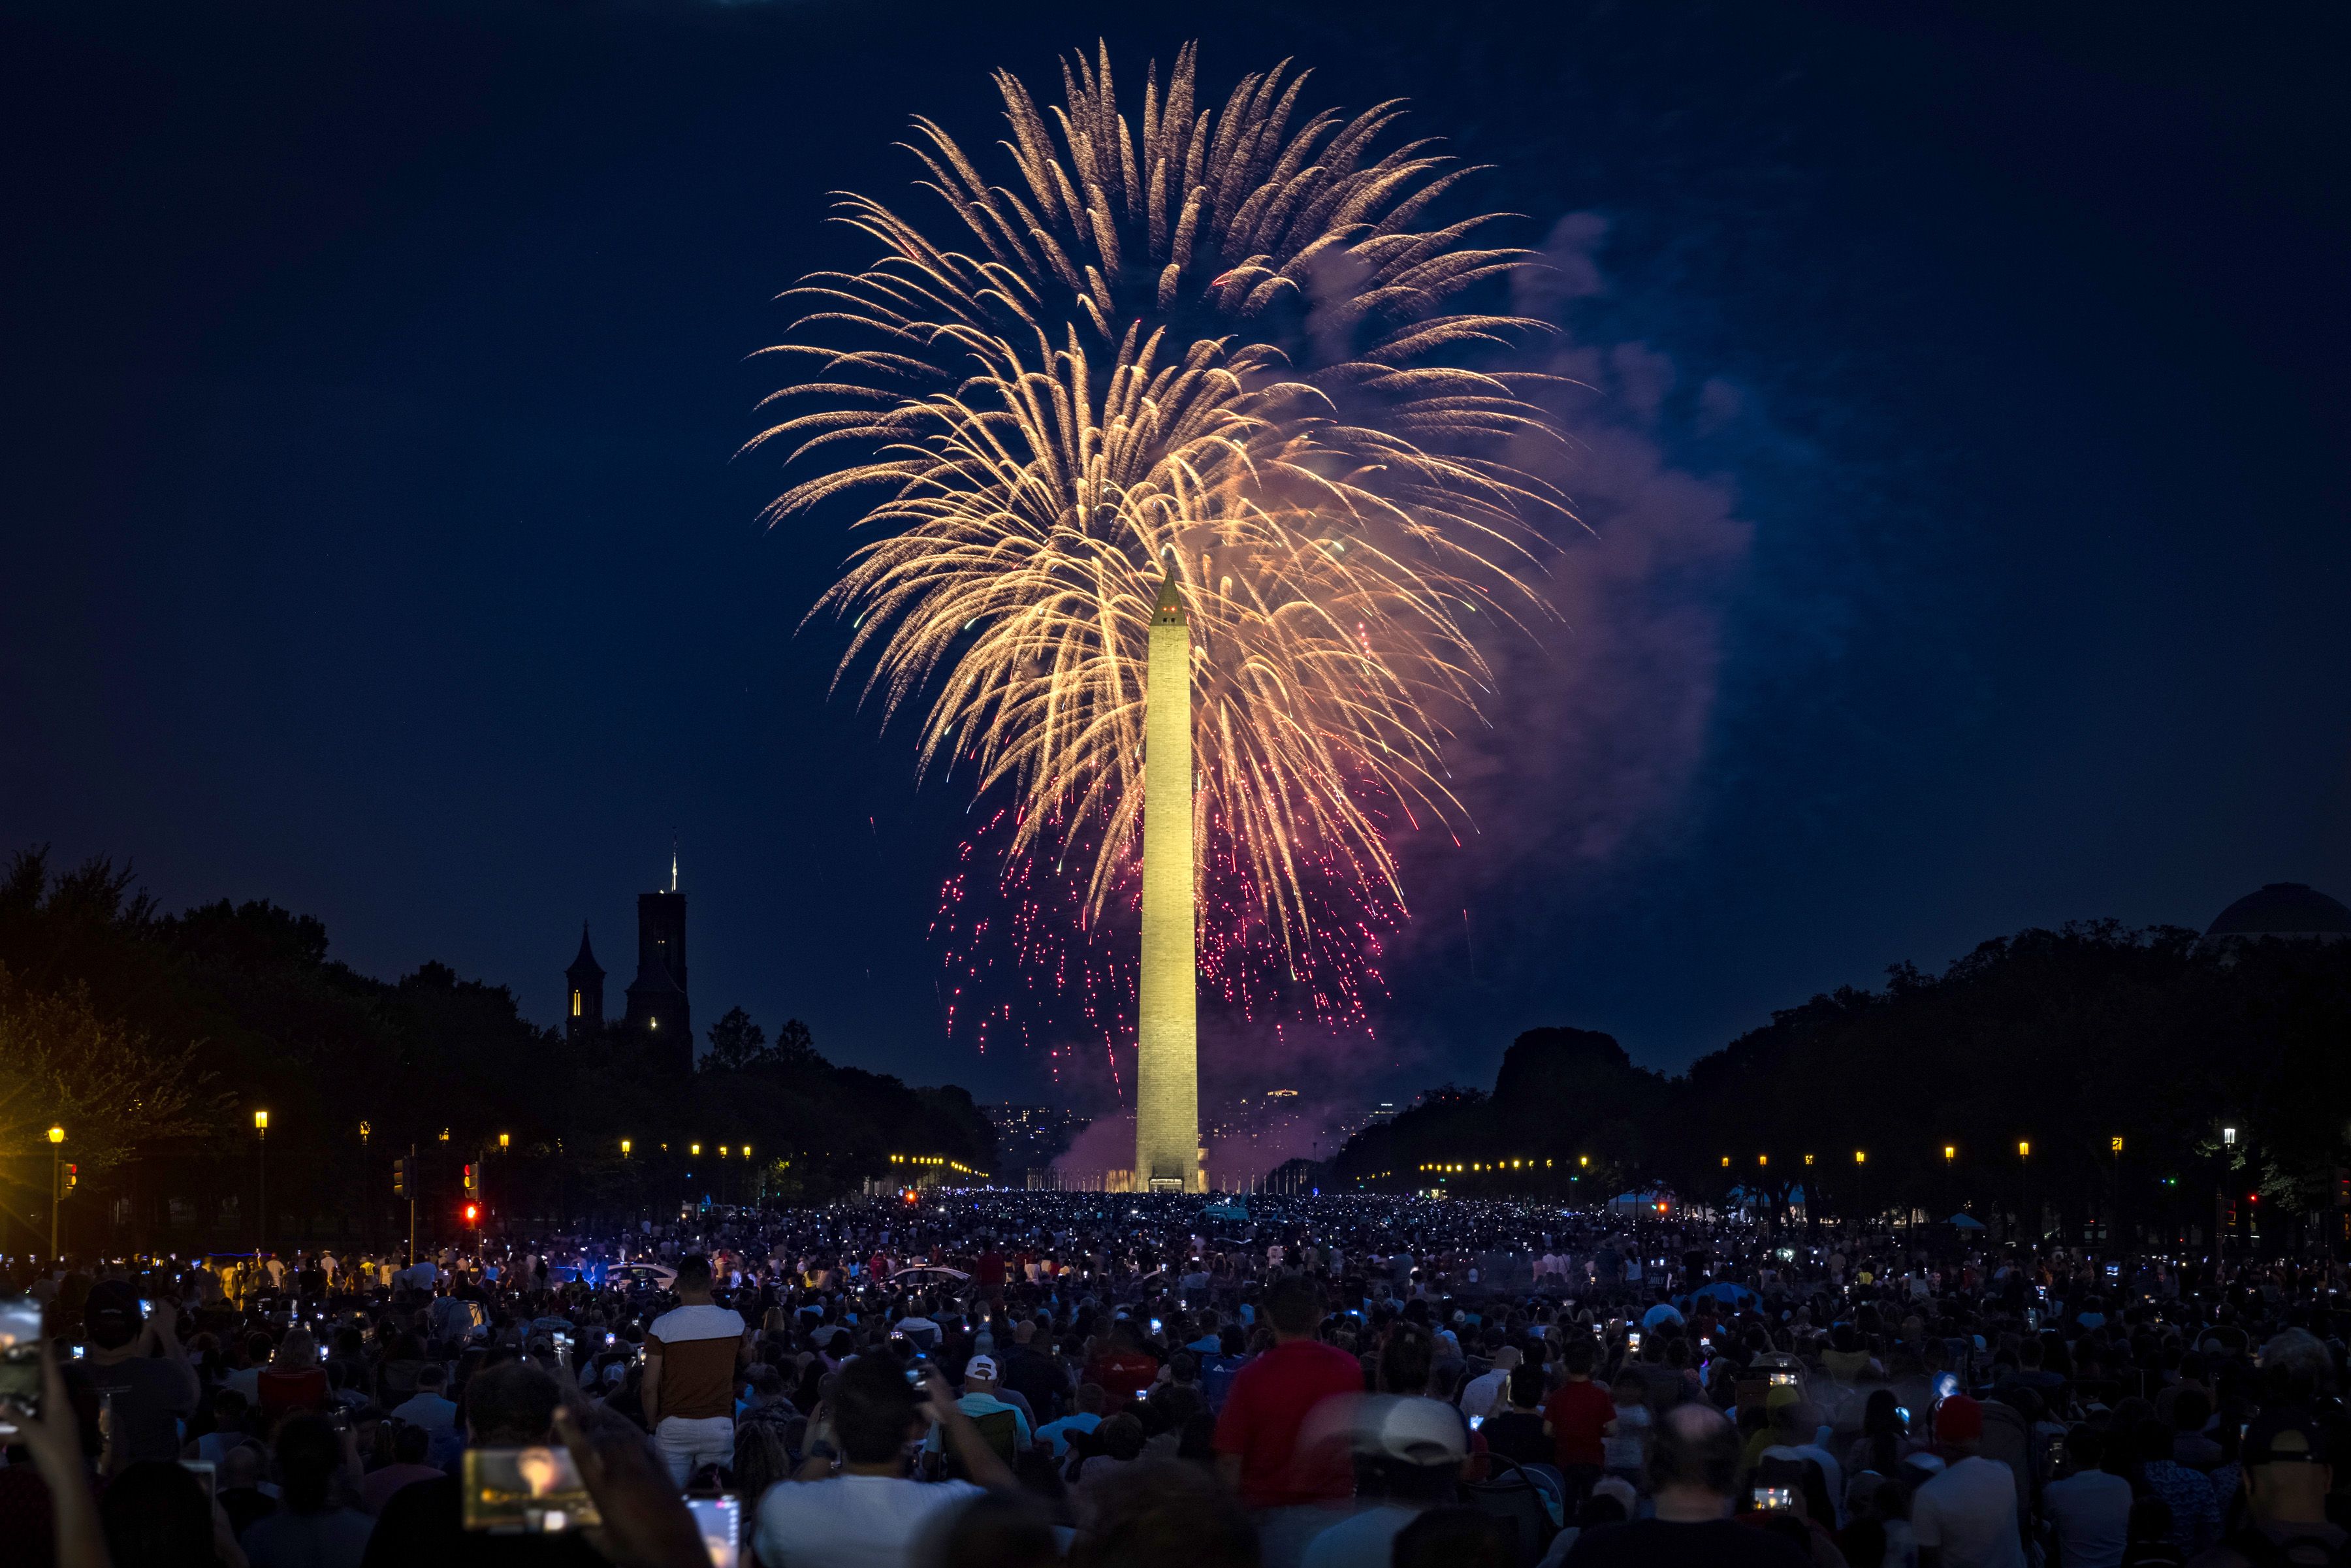 People fill the National Mall to watch the fireworks display during Independence Day celebrations on July 4, 2021 in Washington, DC. 